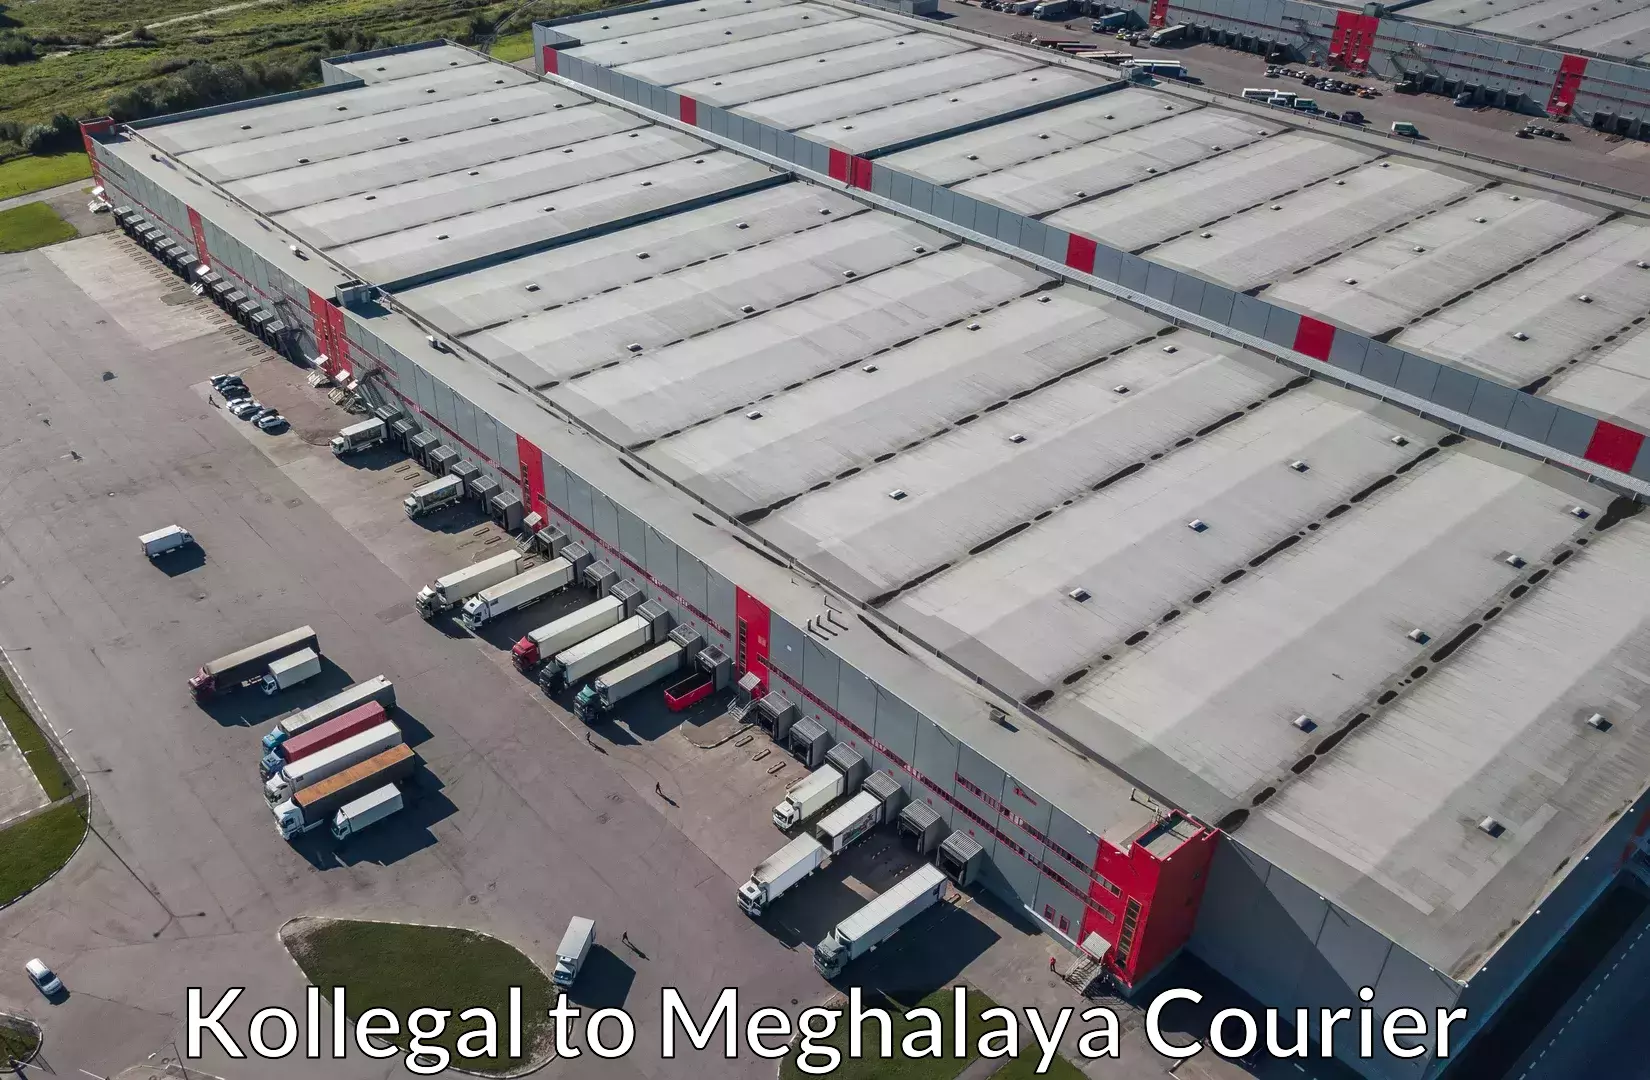 Luggage shipping specialists Kollegal to Meghalaya